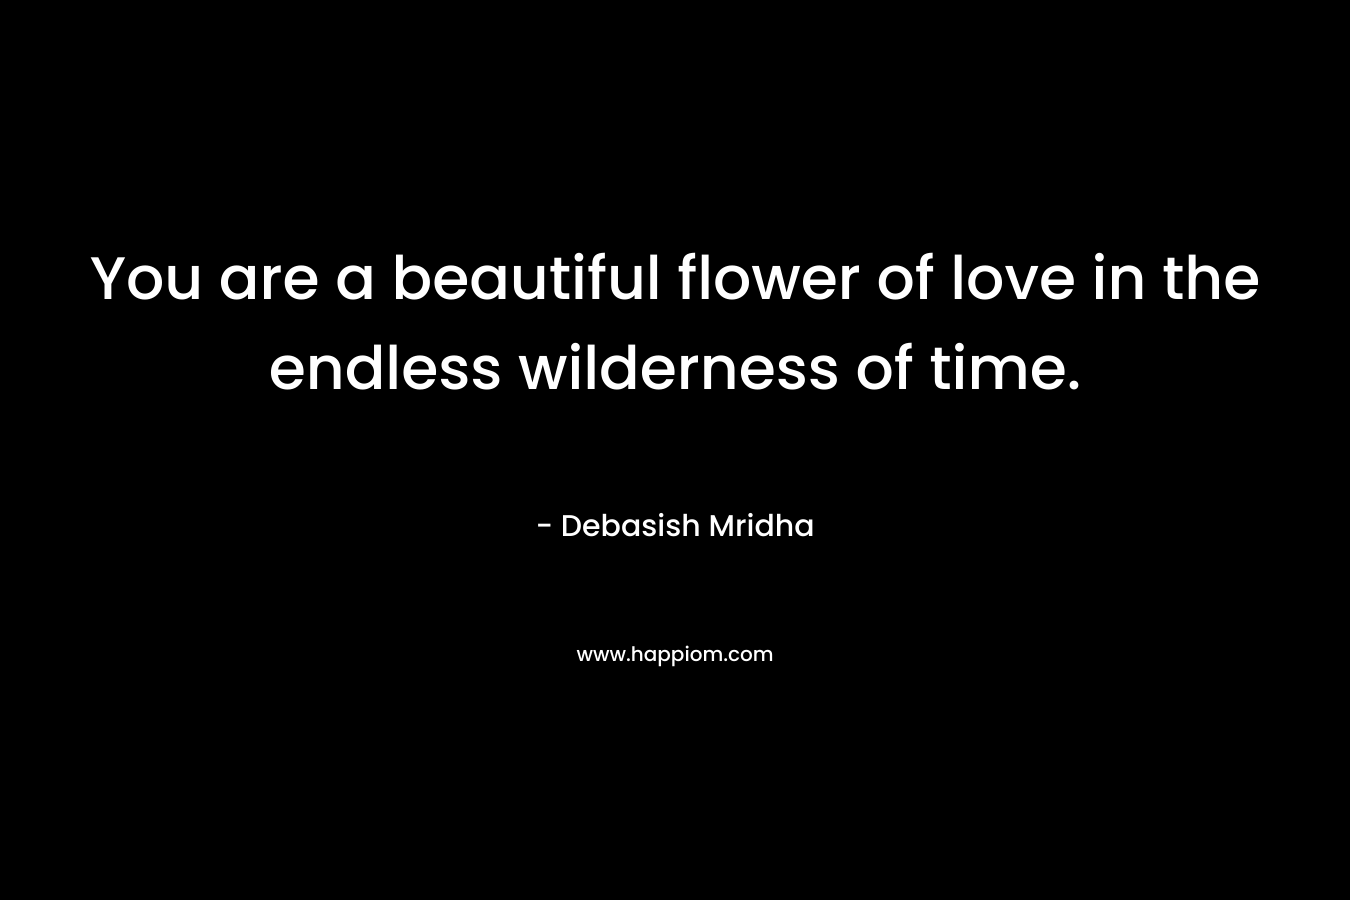 You are a beautiful flower of love in the endless wilderness of time.